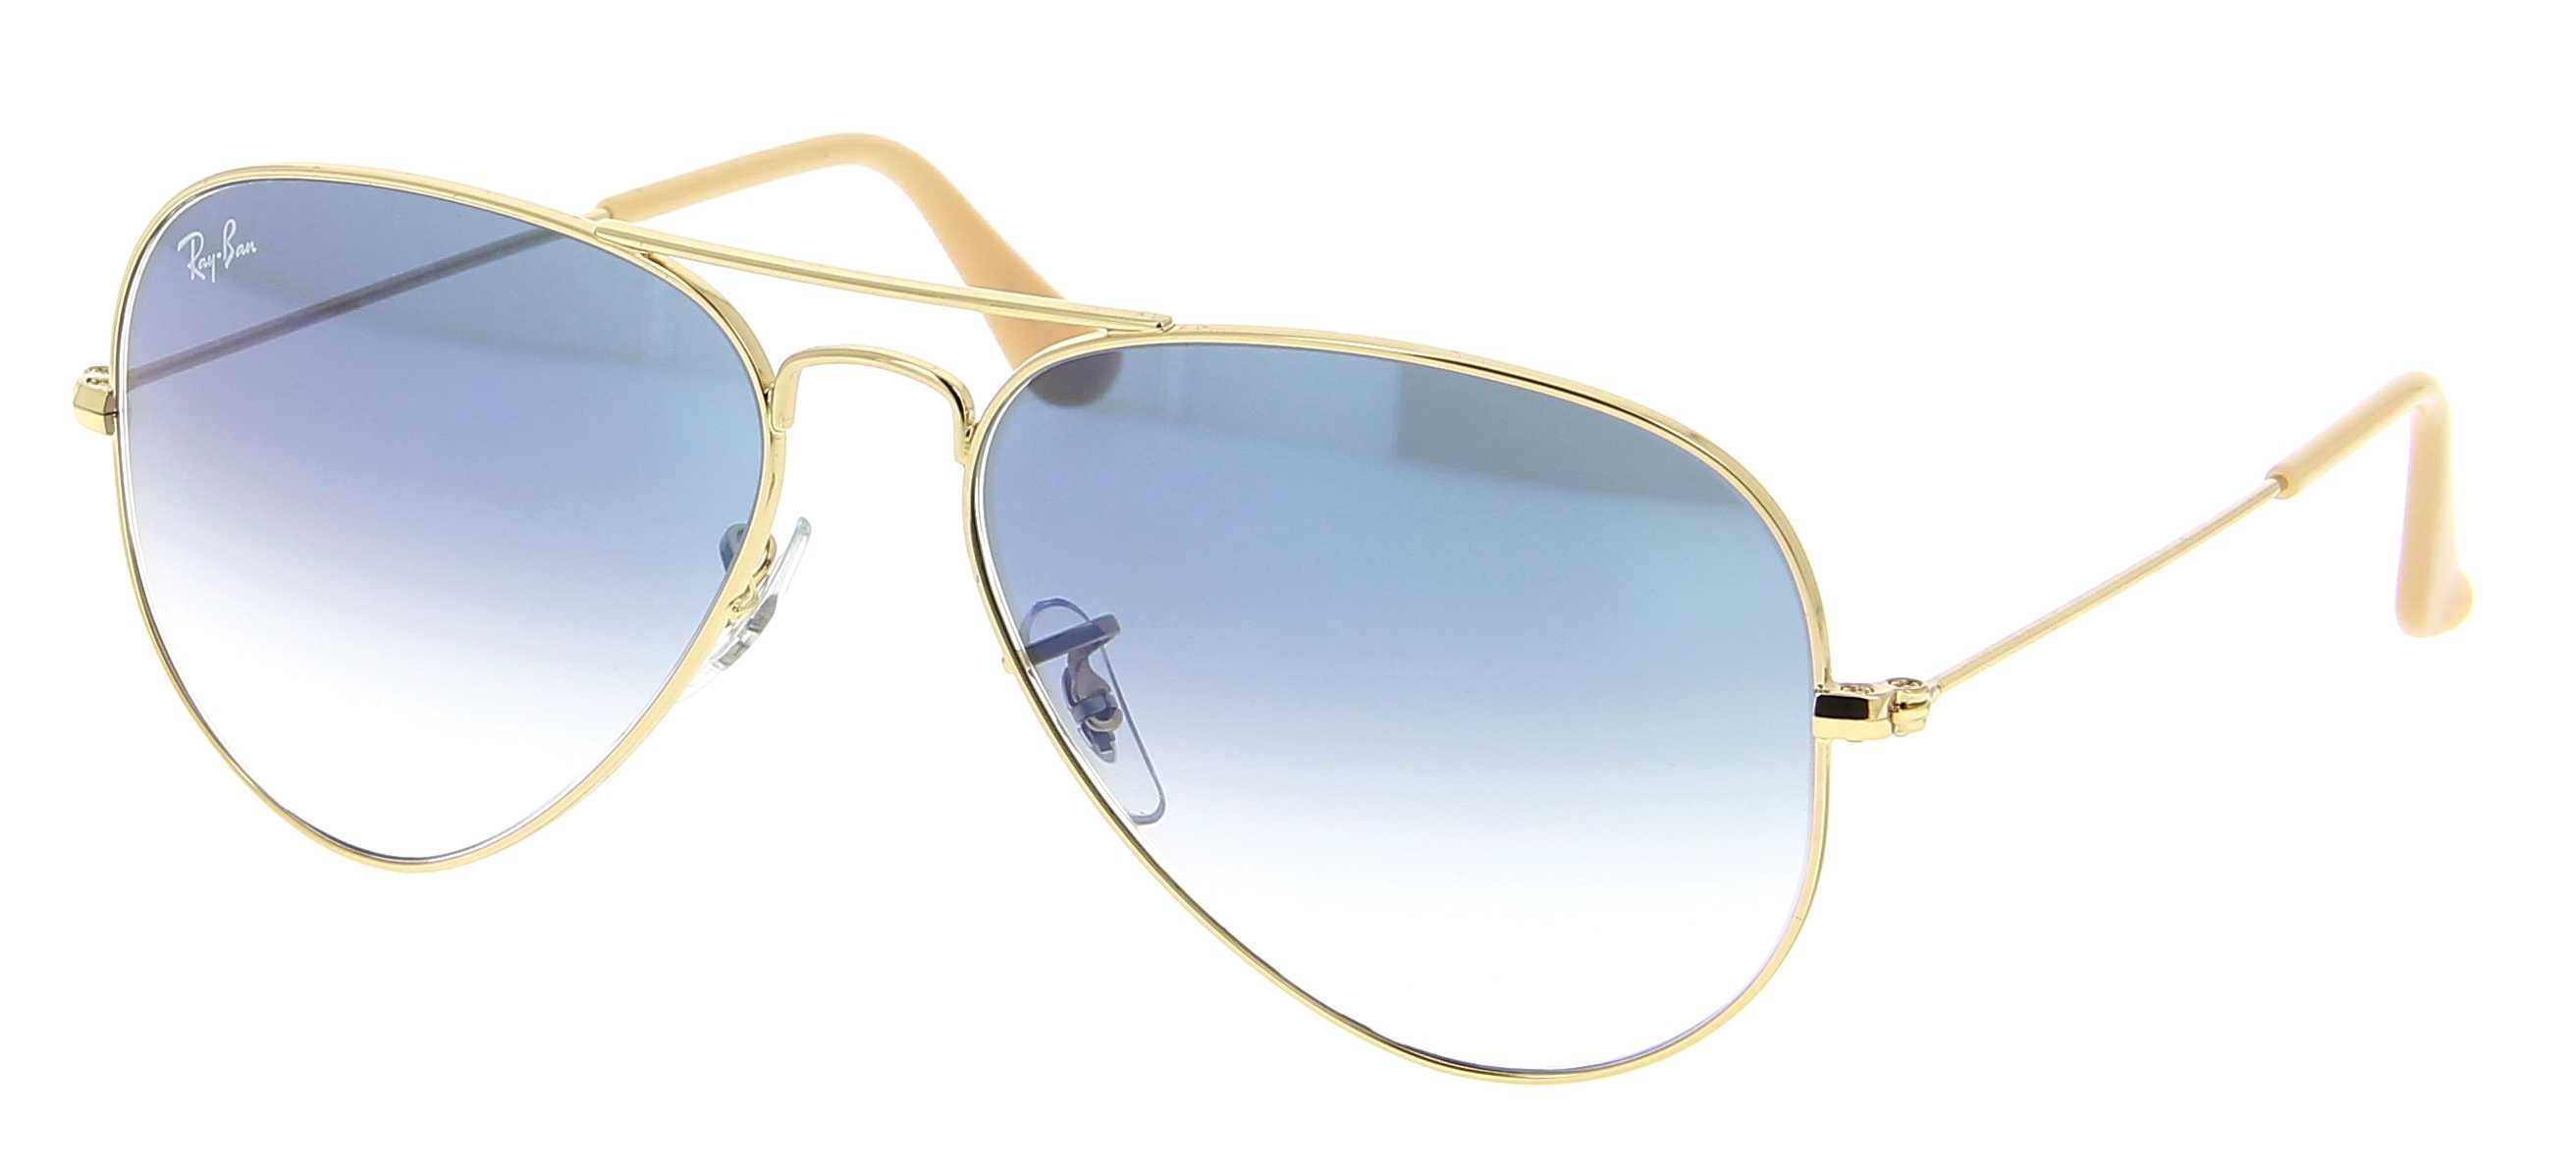 ray ban aviator femme taille 55